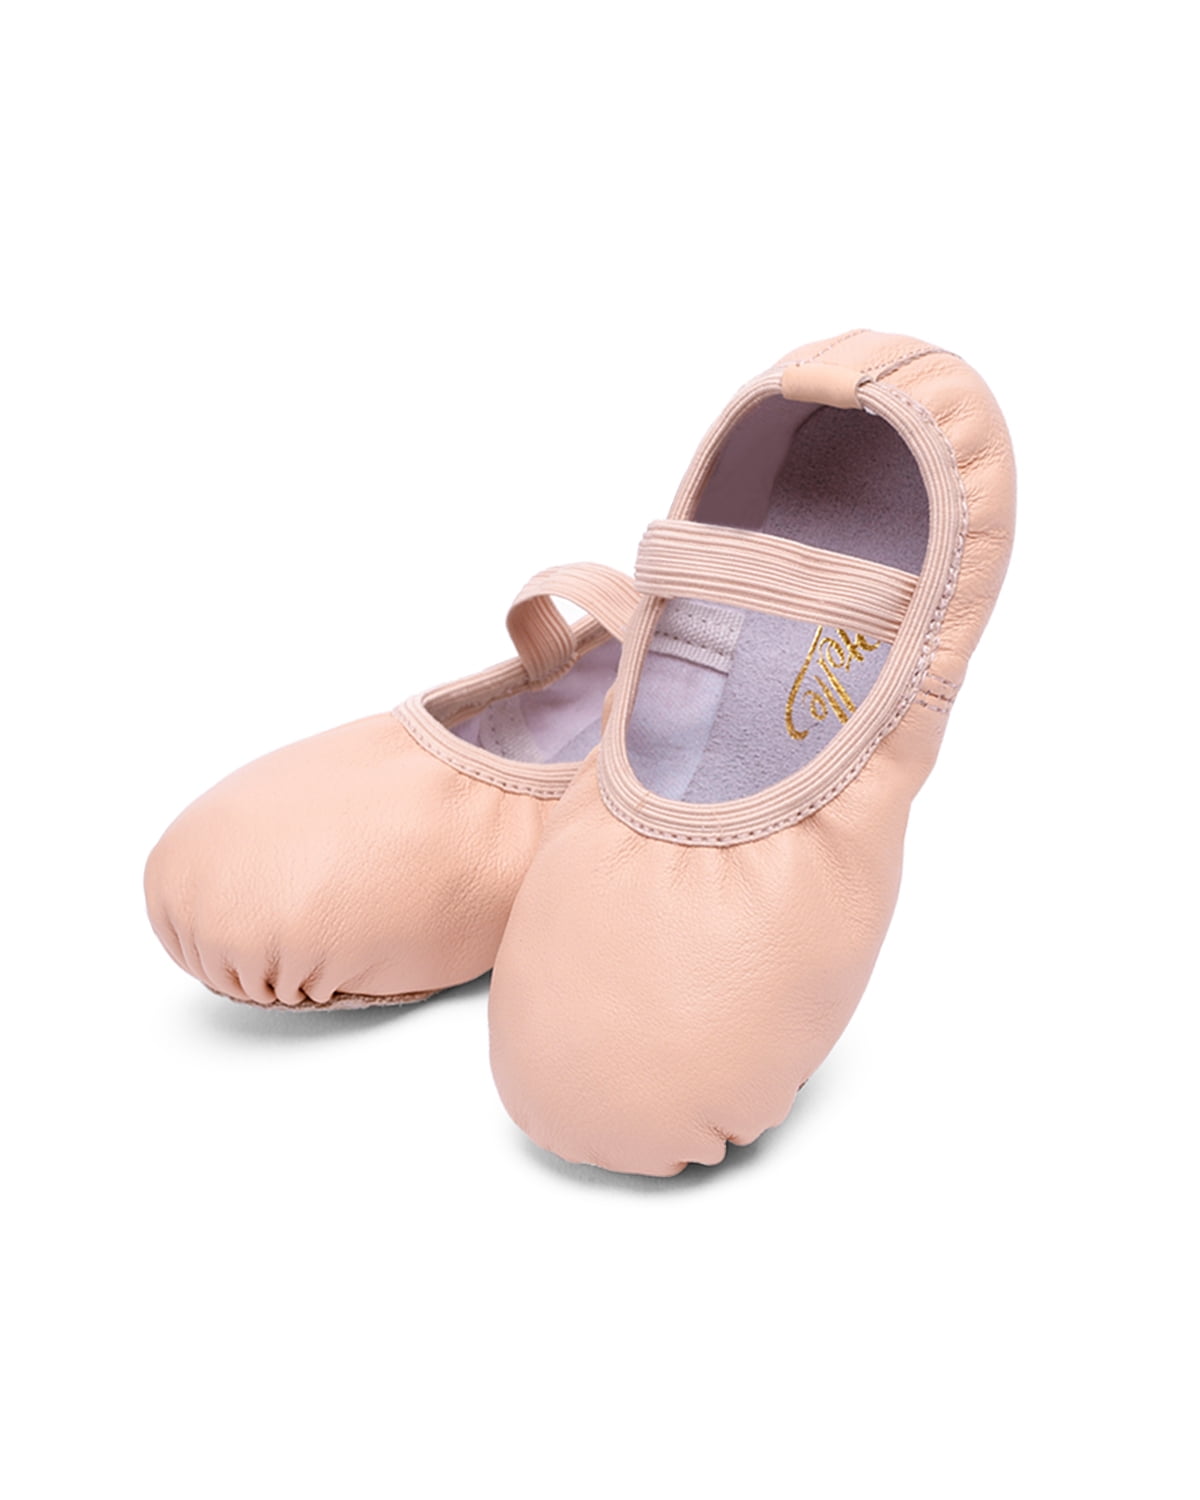 STELLE Girls Premium Authentic Leather Ballet Shoes Slippers for Kids Toddler 